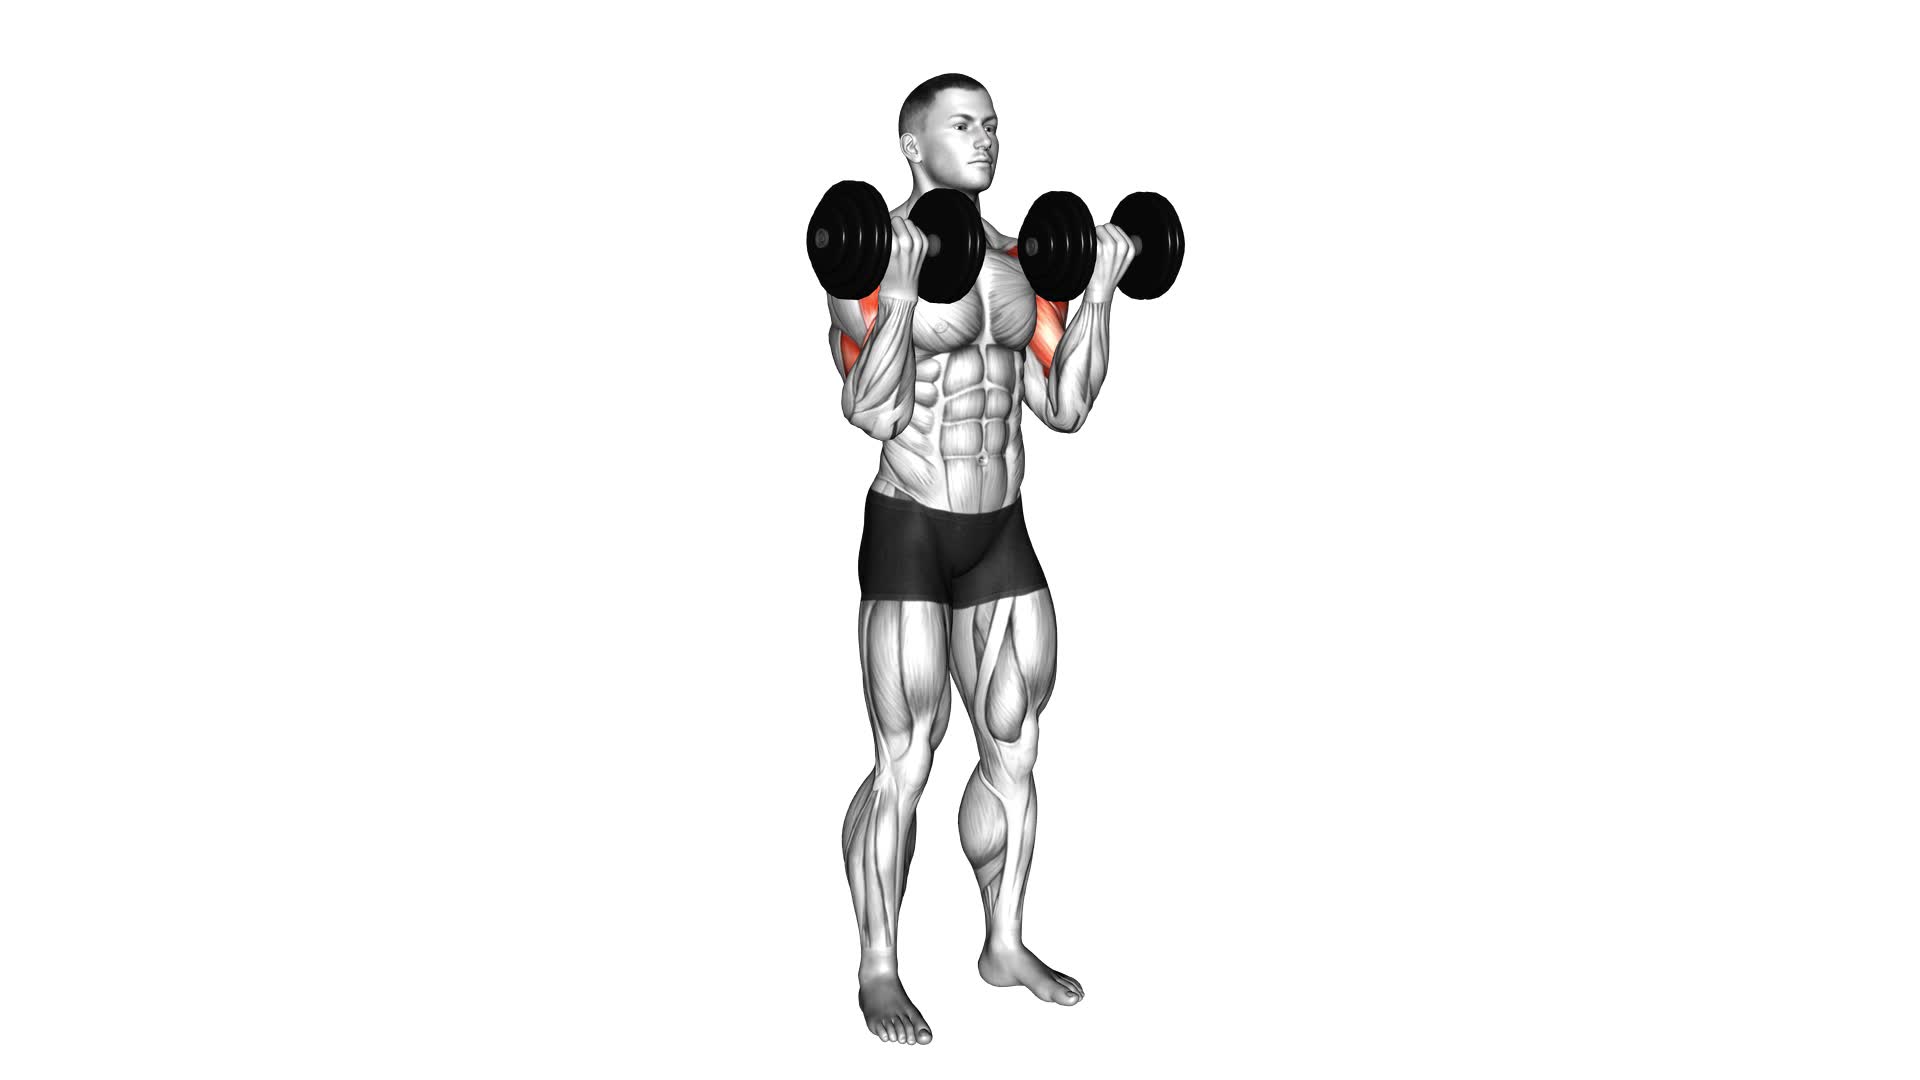 Dumbbell Drag Bicep Curl - Video Exercise Guide & Tips